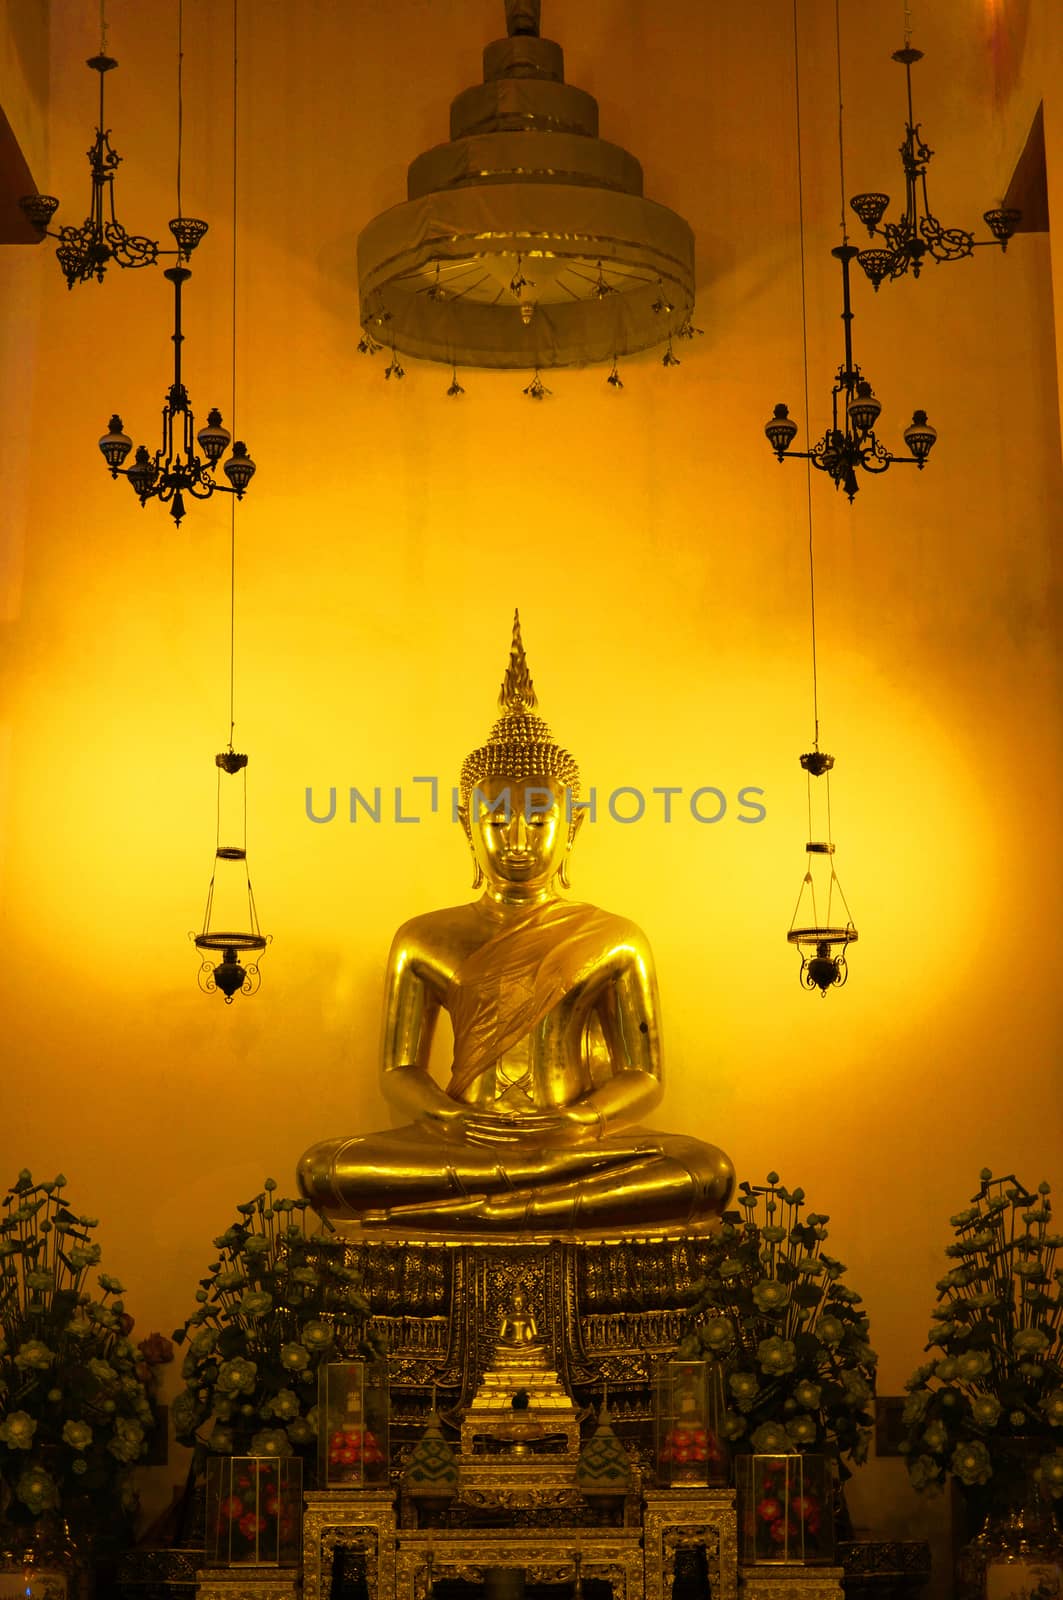 Holy Buddha Respected in Thailand Located at Wat Pho. Lord looks gorgeous, golden color.